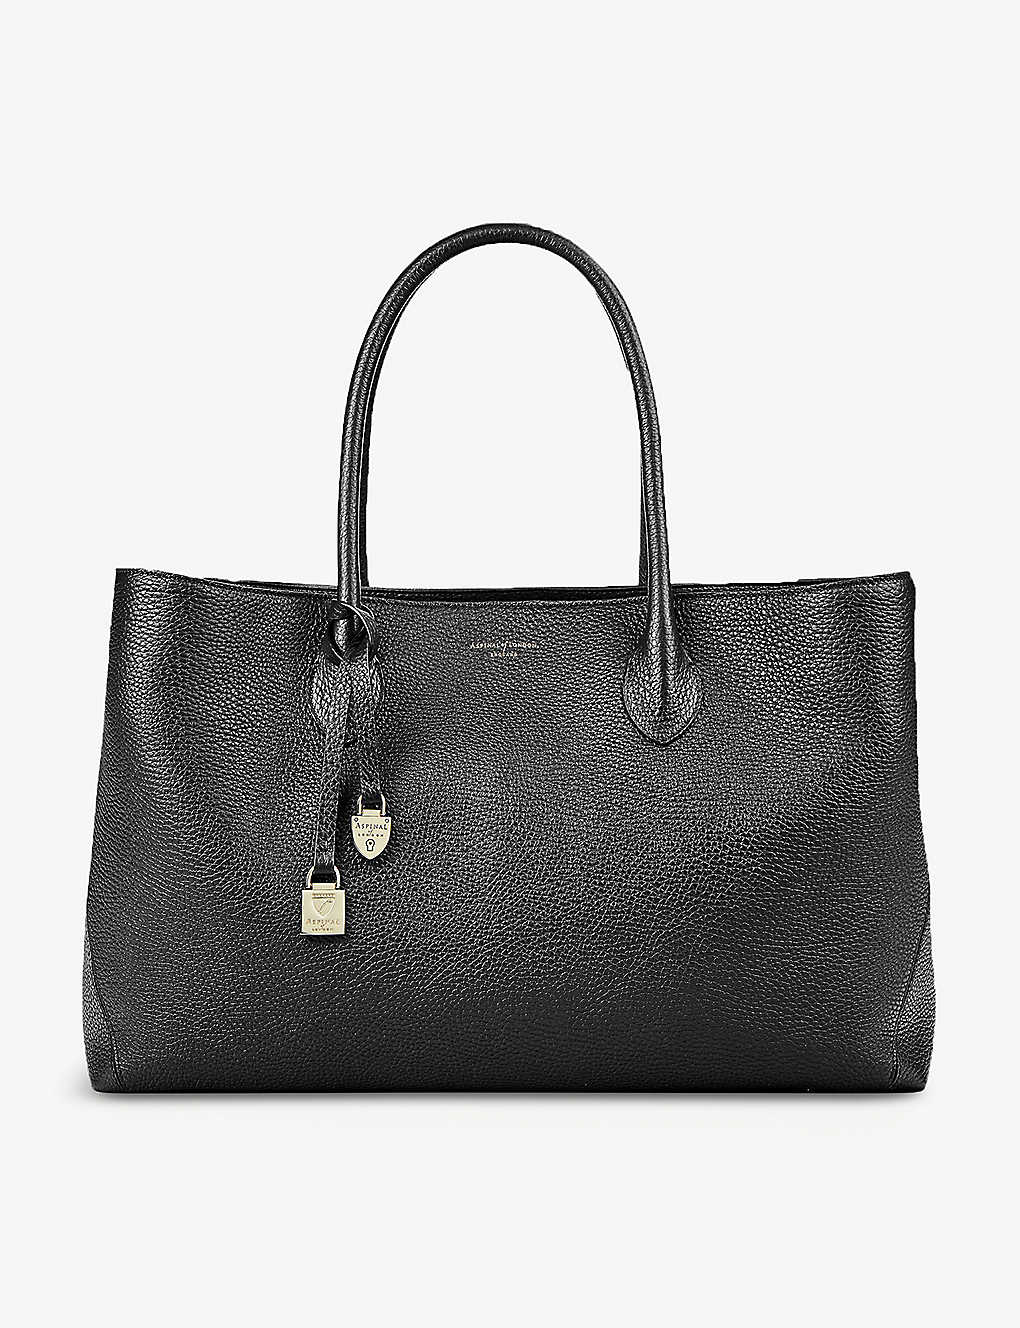 Shop Aspinal Of London Women's London Large Leather Tote Bag